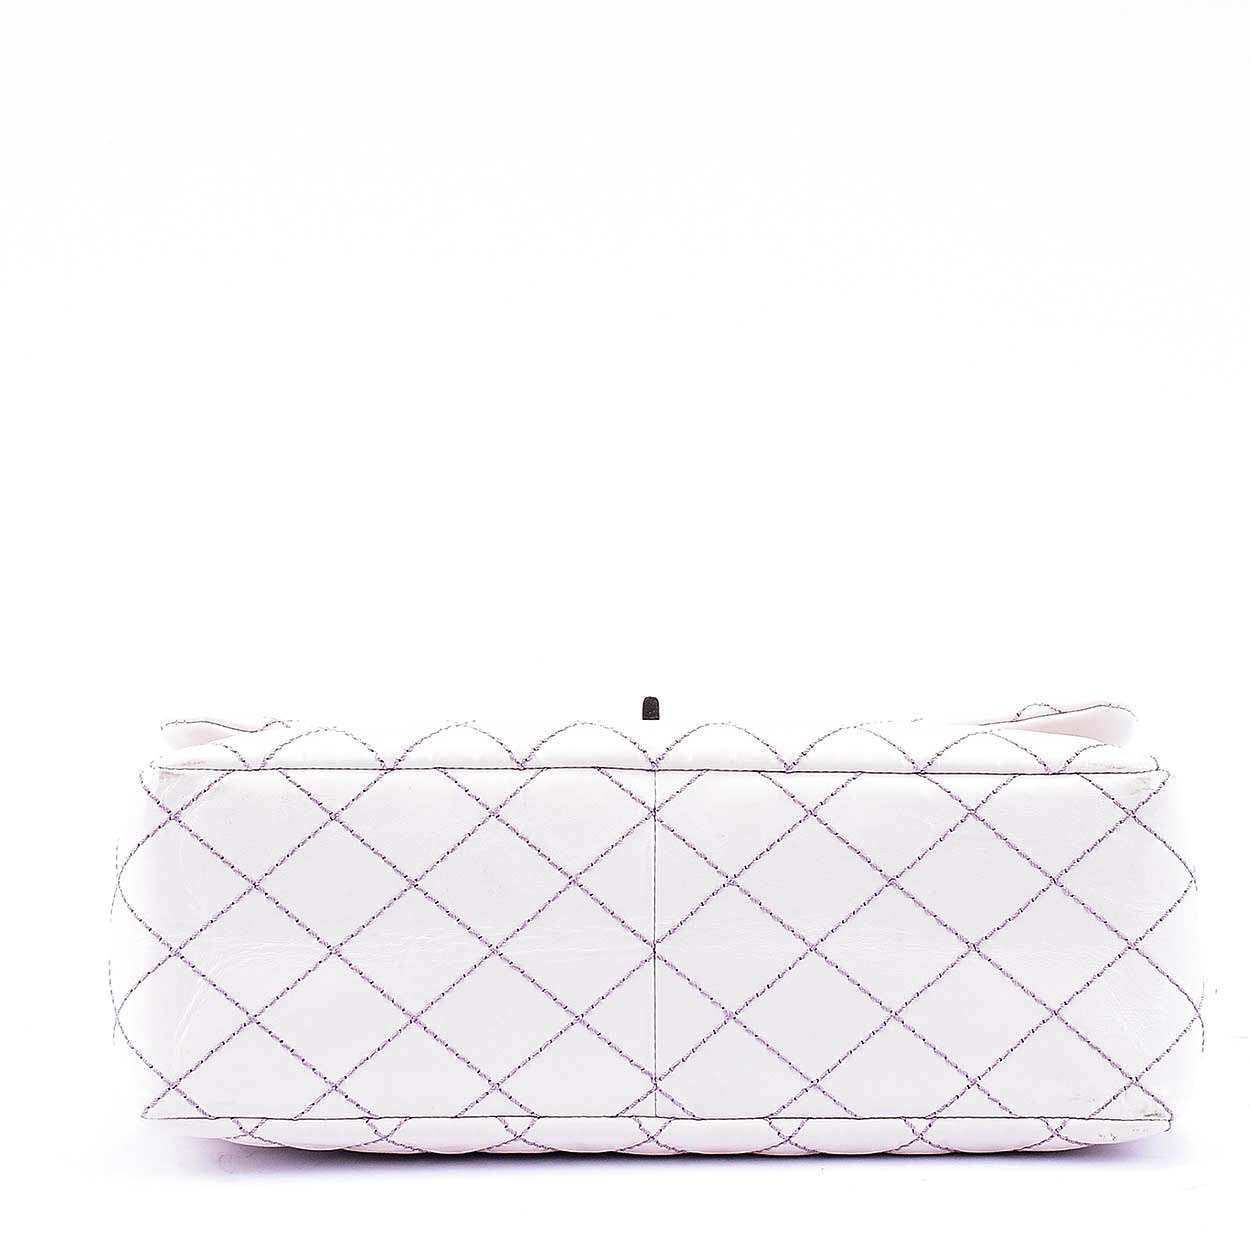 Chanel - White 2.55 Reissue Quilted Leather Purple Stitch Flap Bag